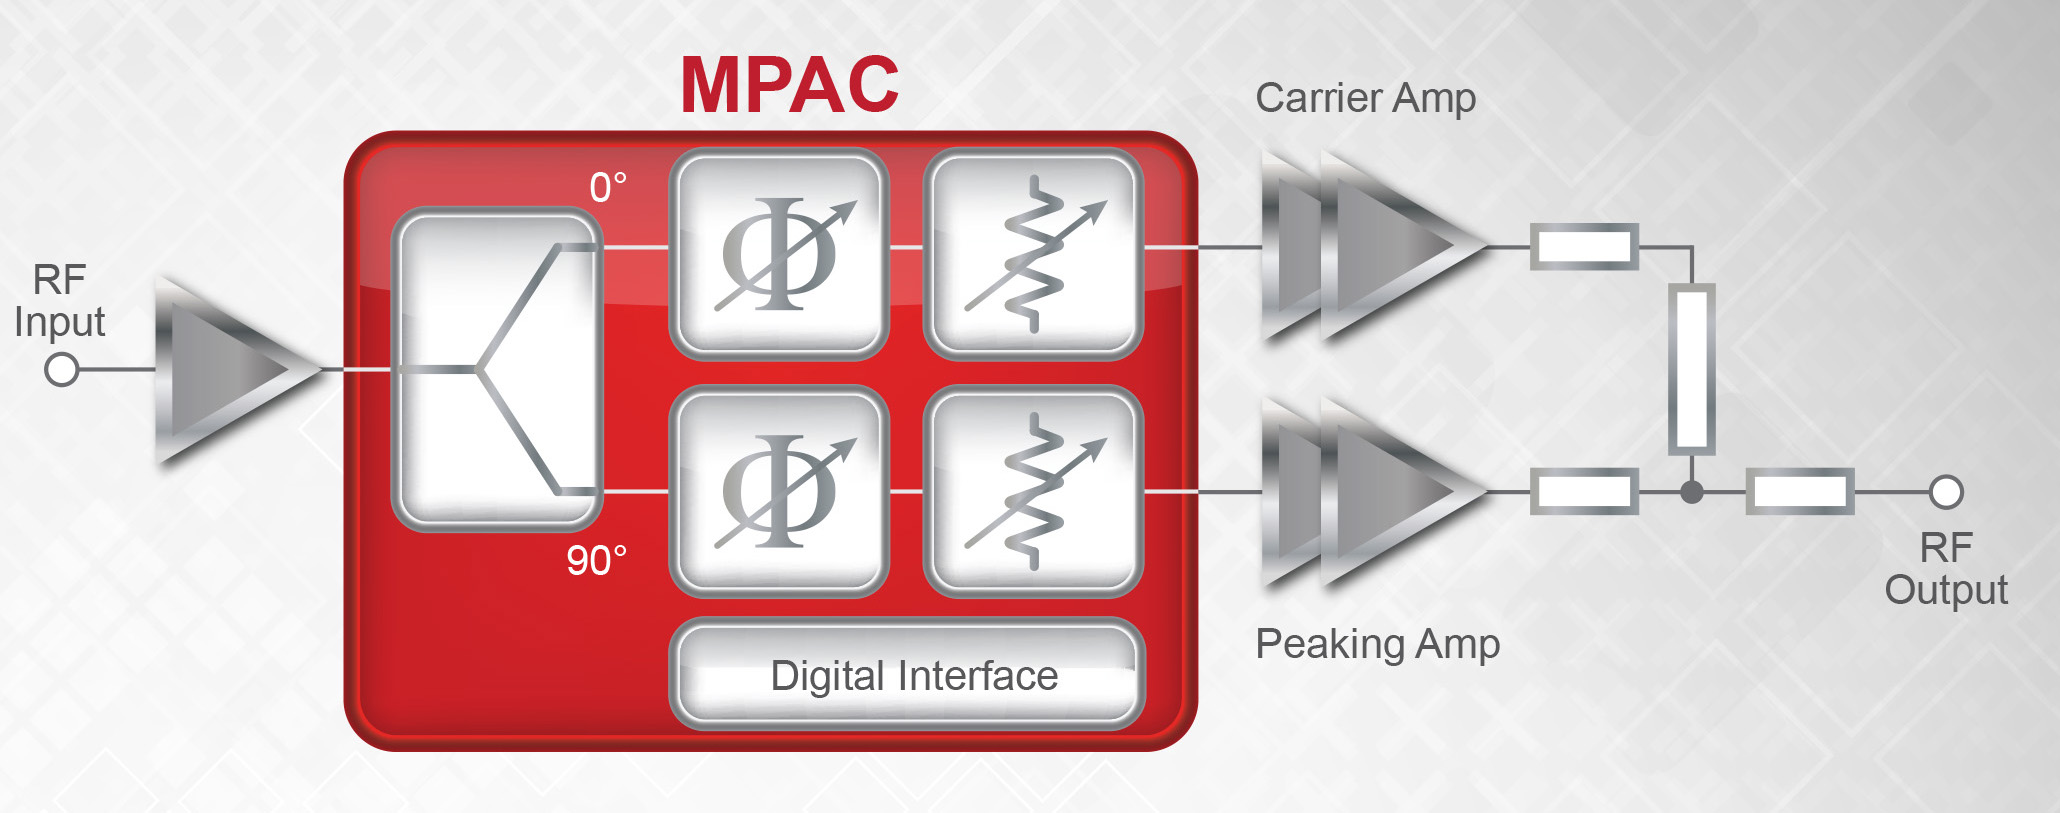 Figure 2 -The Ultra CMOS MPAC digitally controls the phase and amplitude of each signal